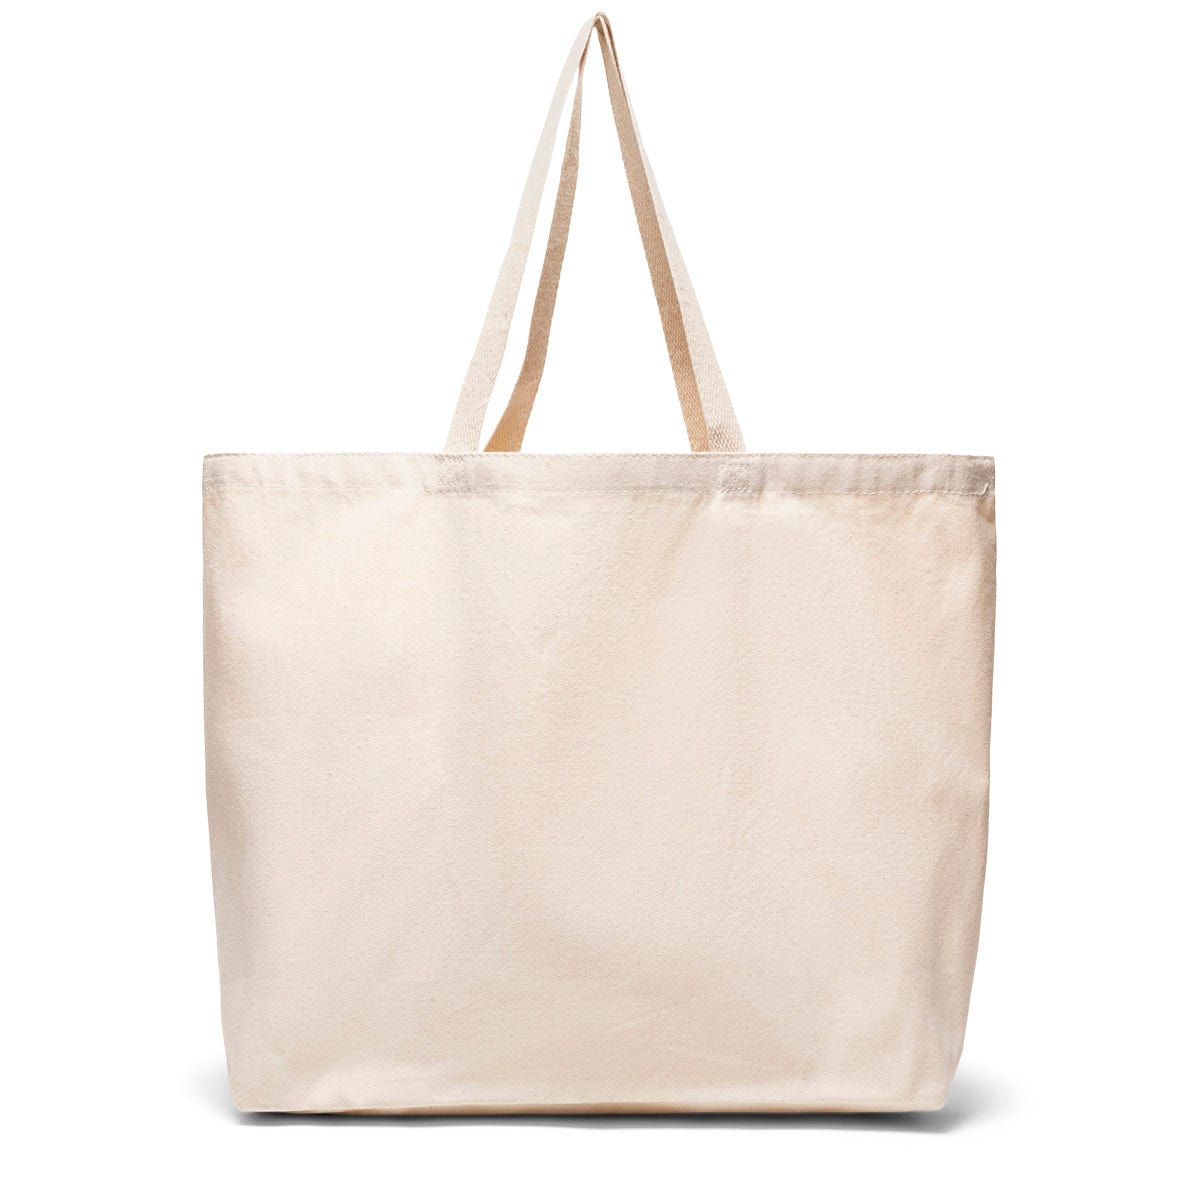 The Good Company Bags TAN / O/S JAZZ FEST TOTE